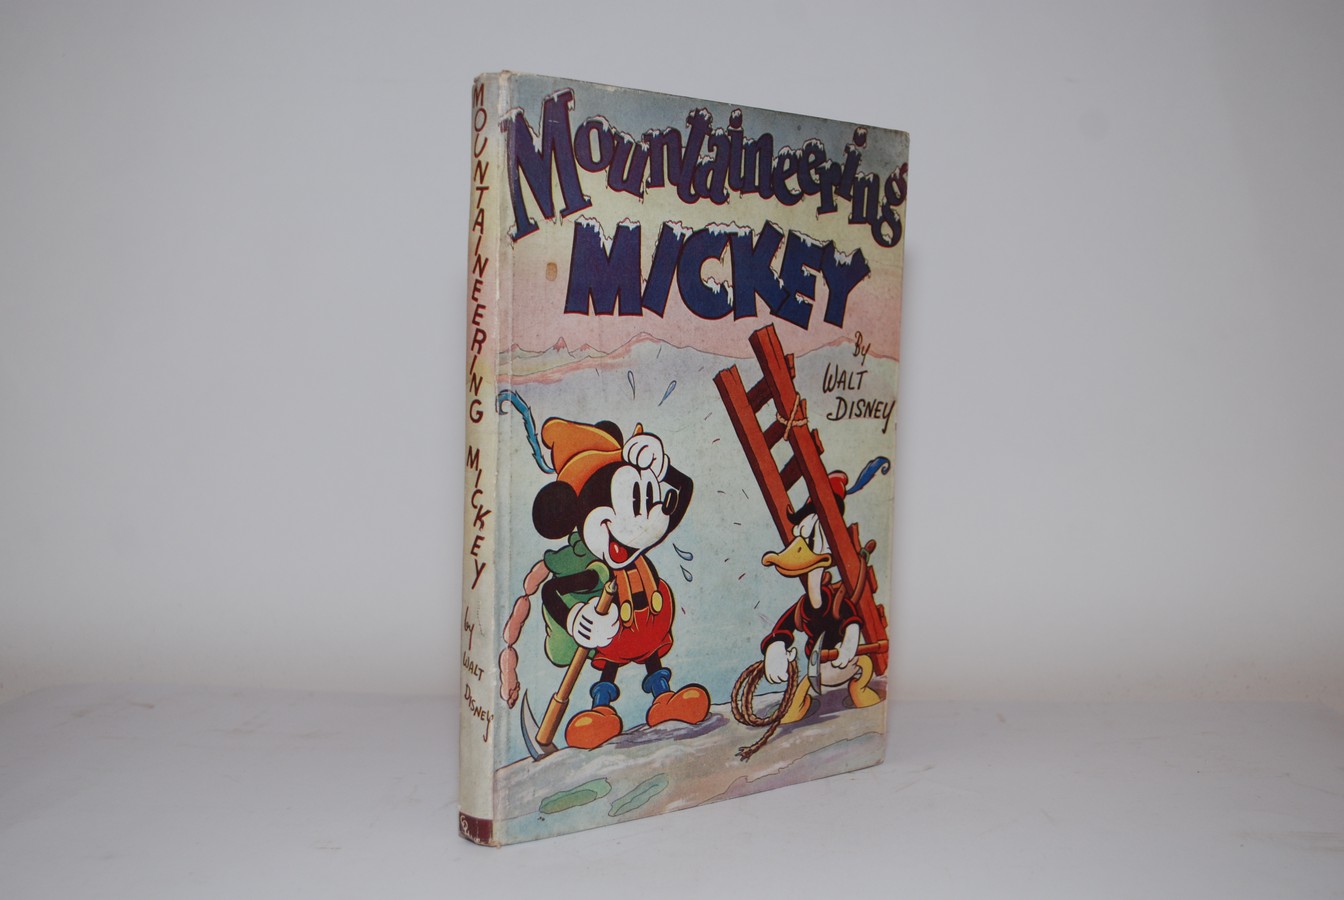 Disney, Walt. Mountaineering Mickey, first edition, illustrations, some browning, original